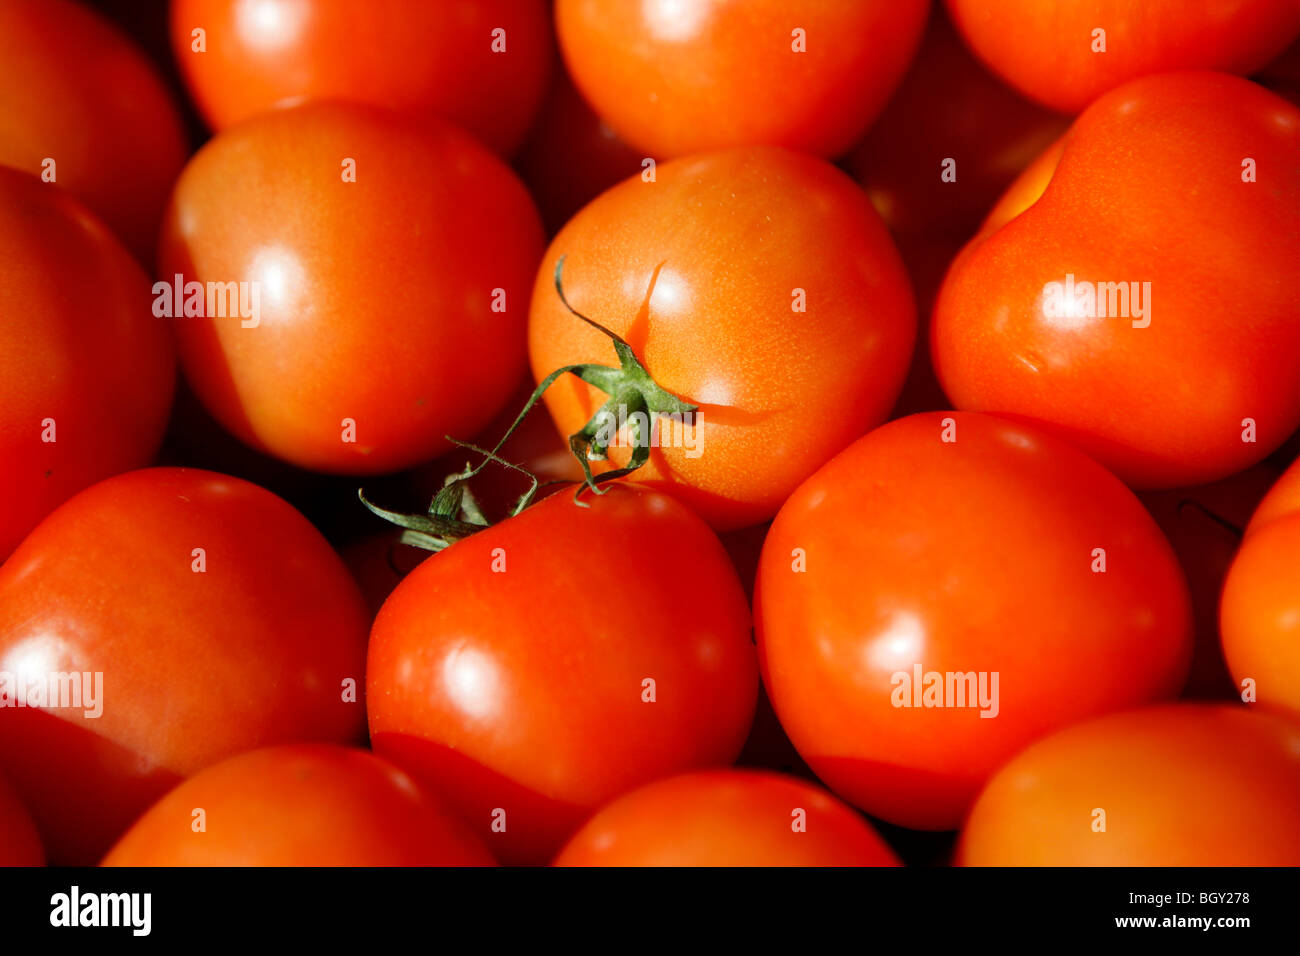 A tray of tomatoes in a supermarket. Stock Photo